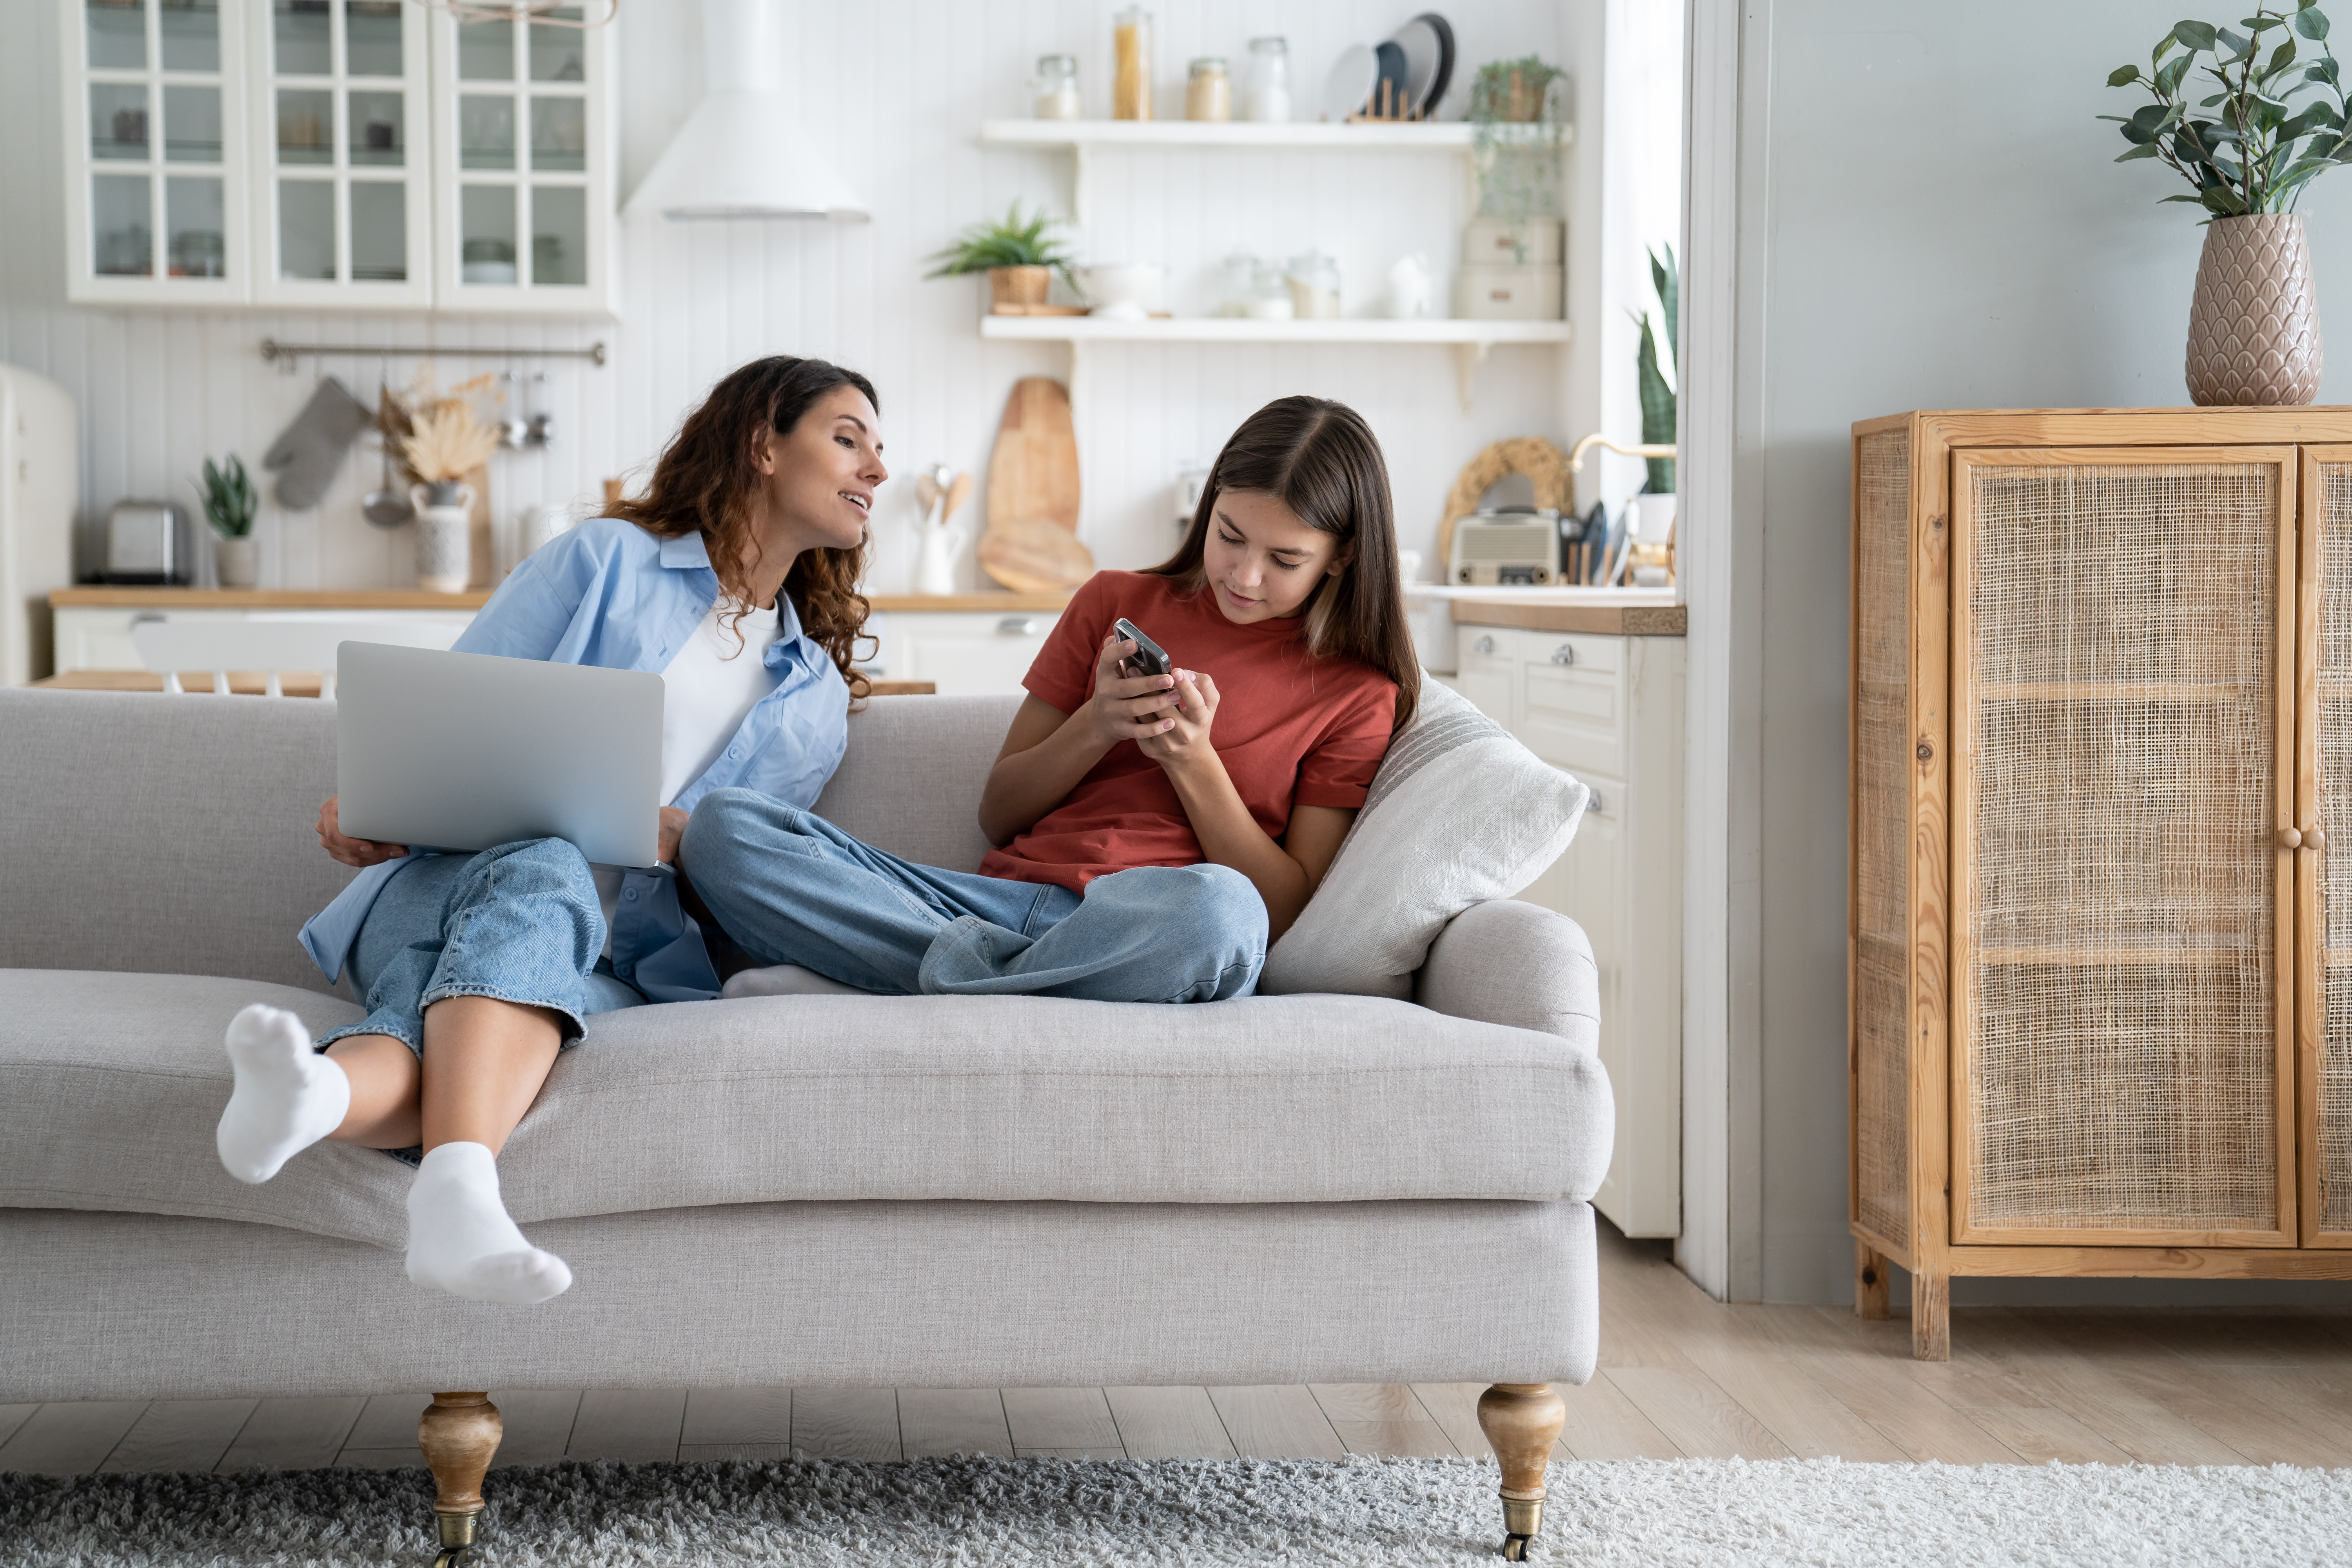 Independent everyday teen girl sits on sofa keeps secrets from mom woman by hiding phone screen | Source: Getty Images